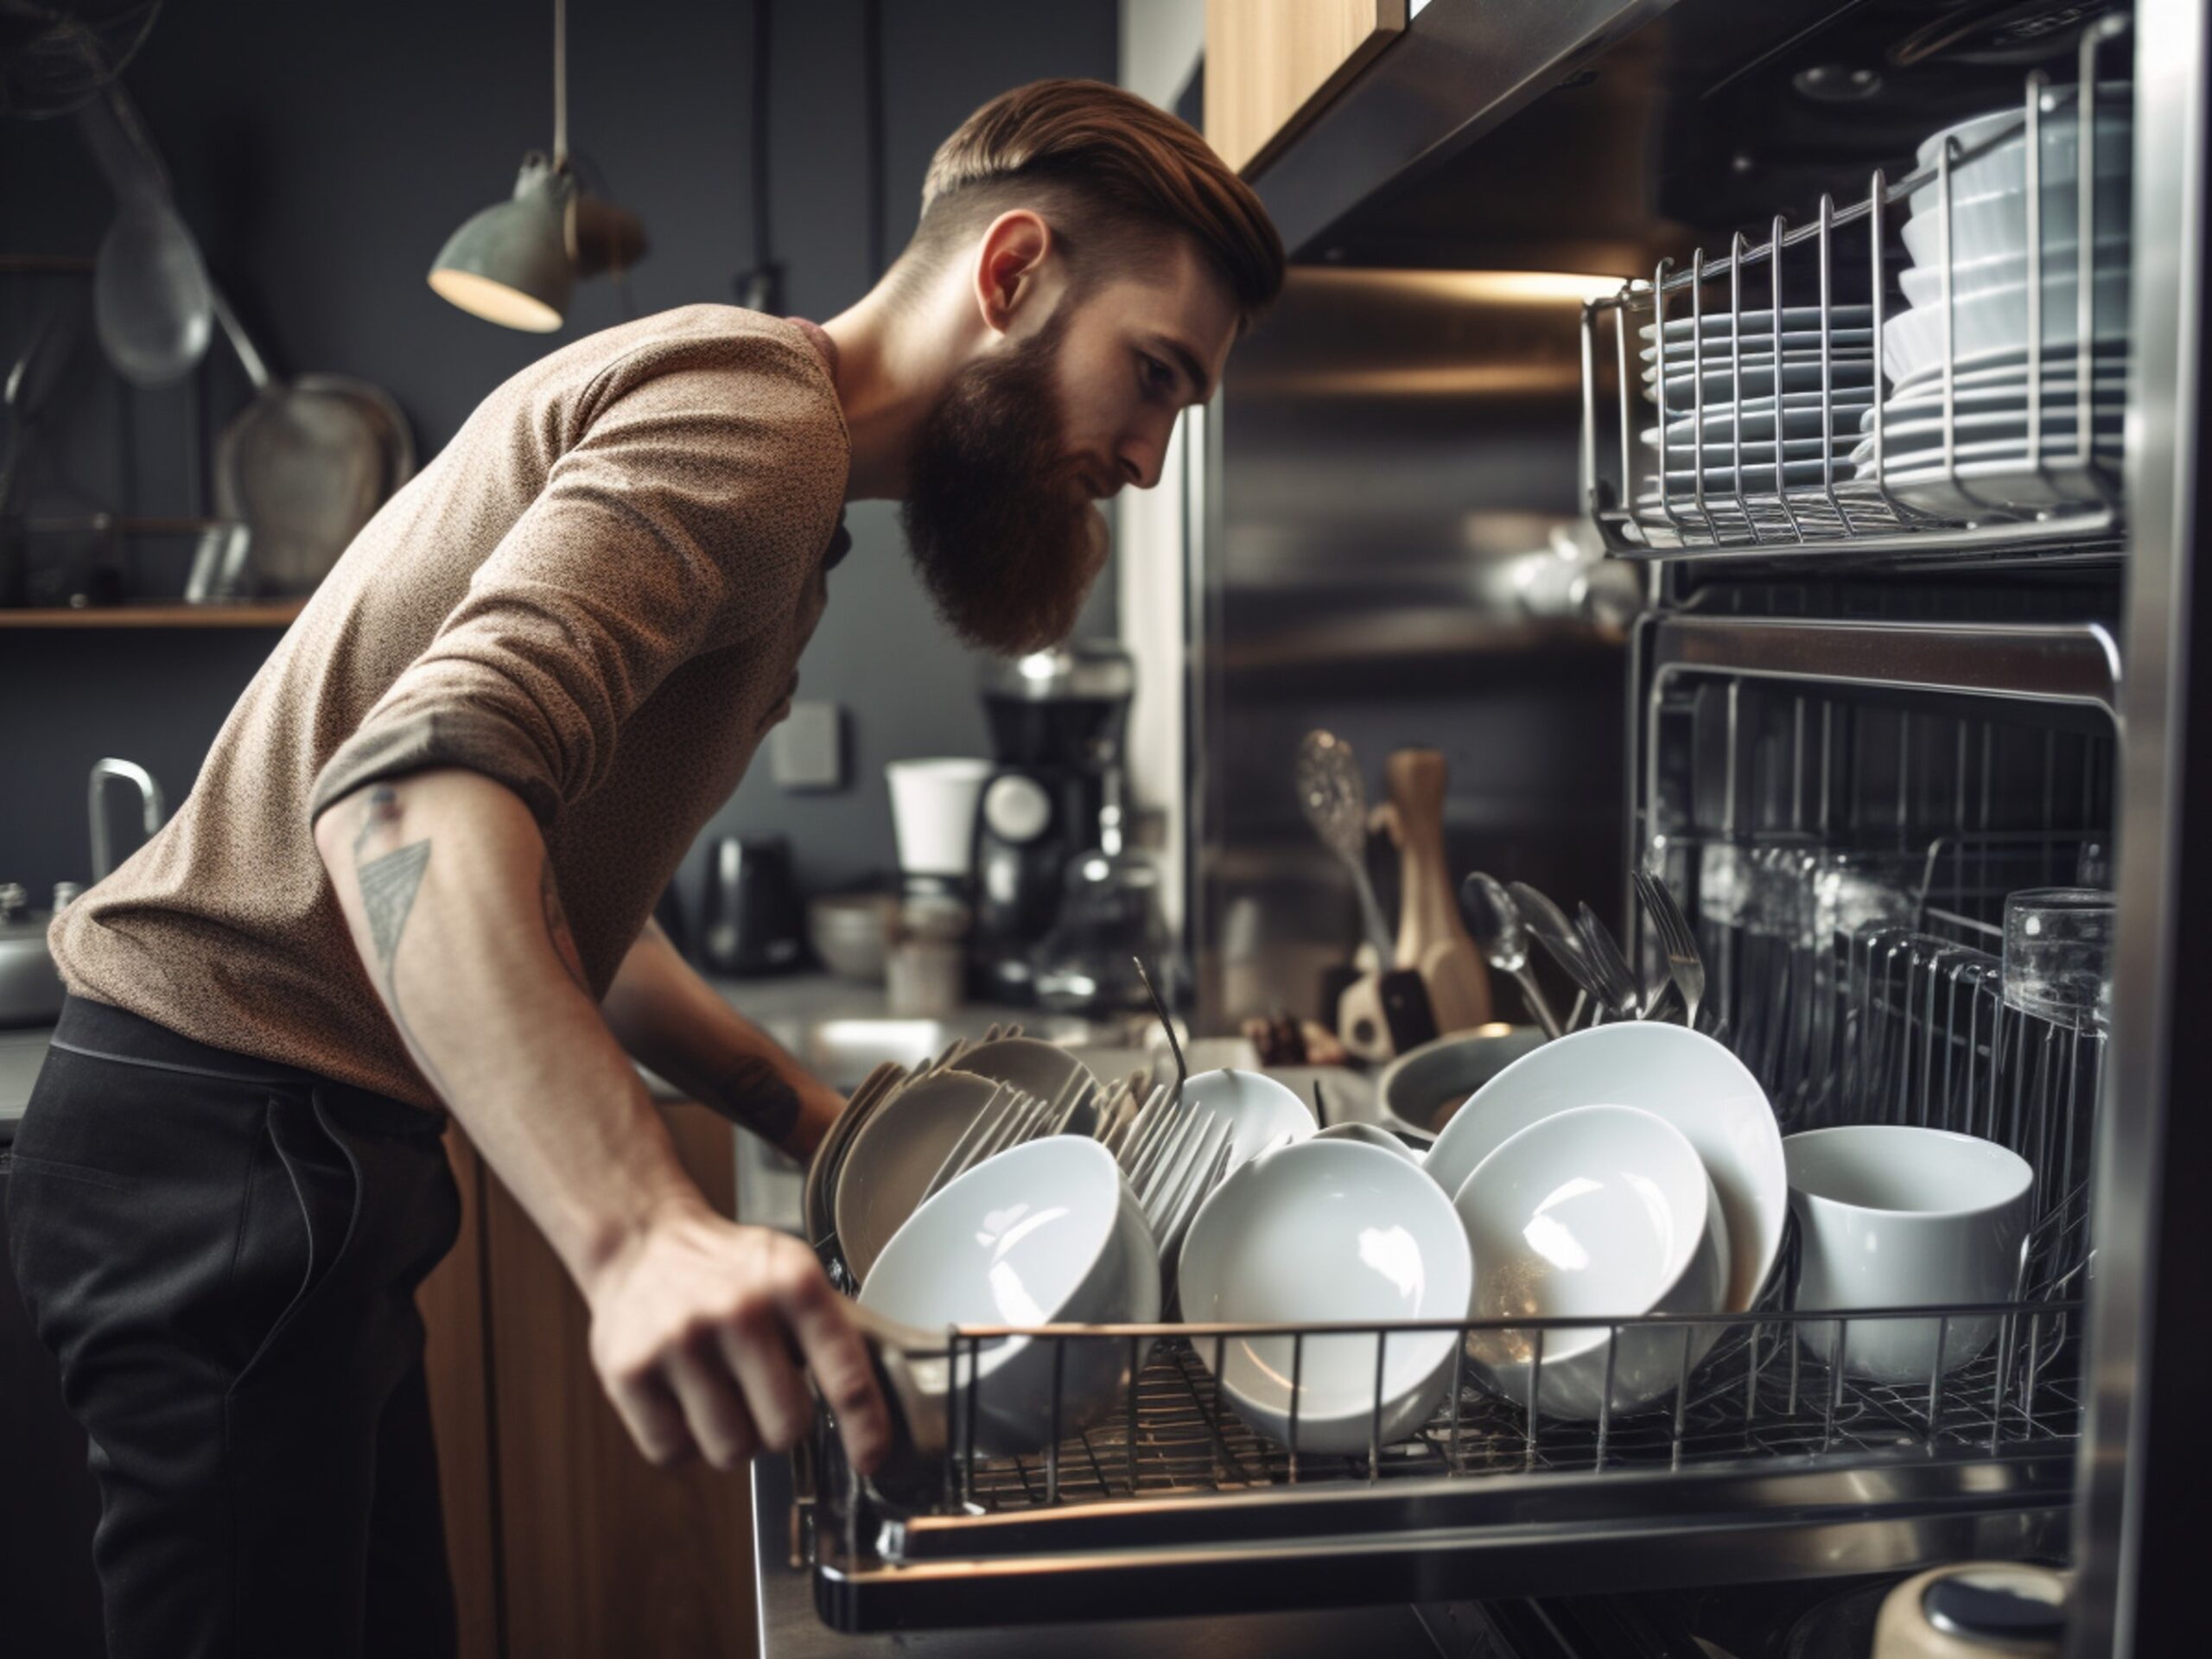 A man in front of an open dishwasher takes out clean dishes after washing.